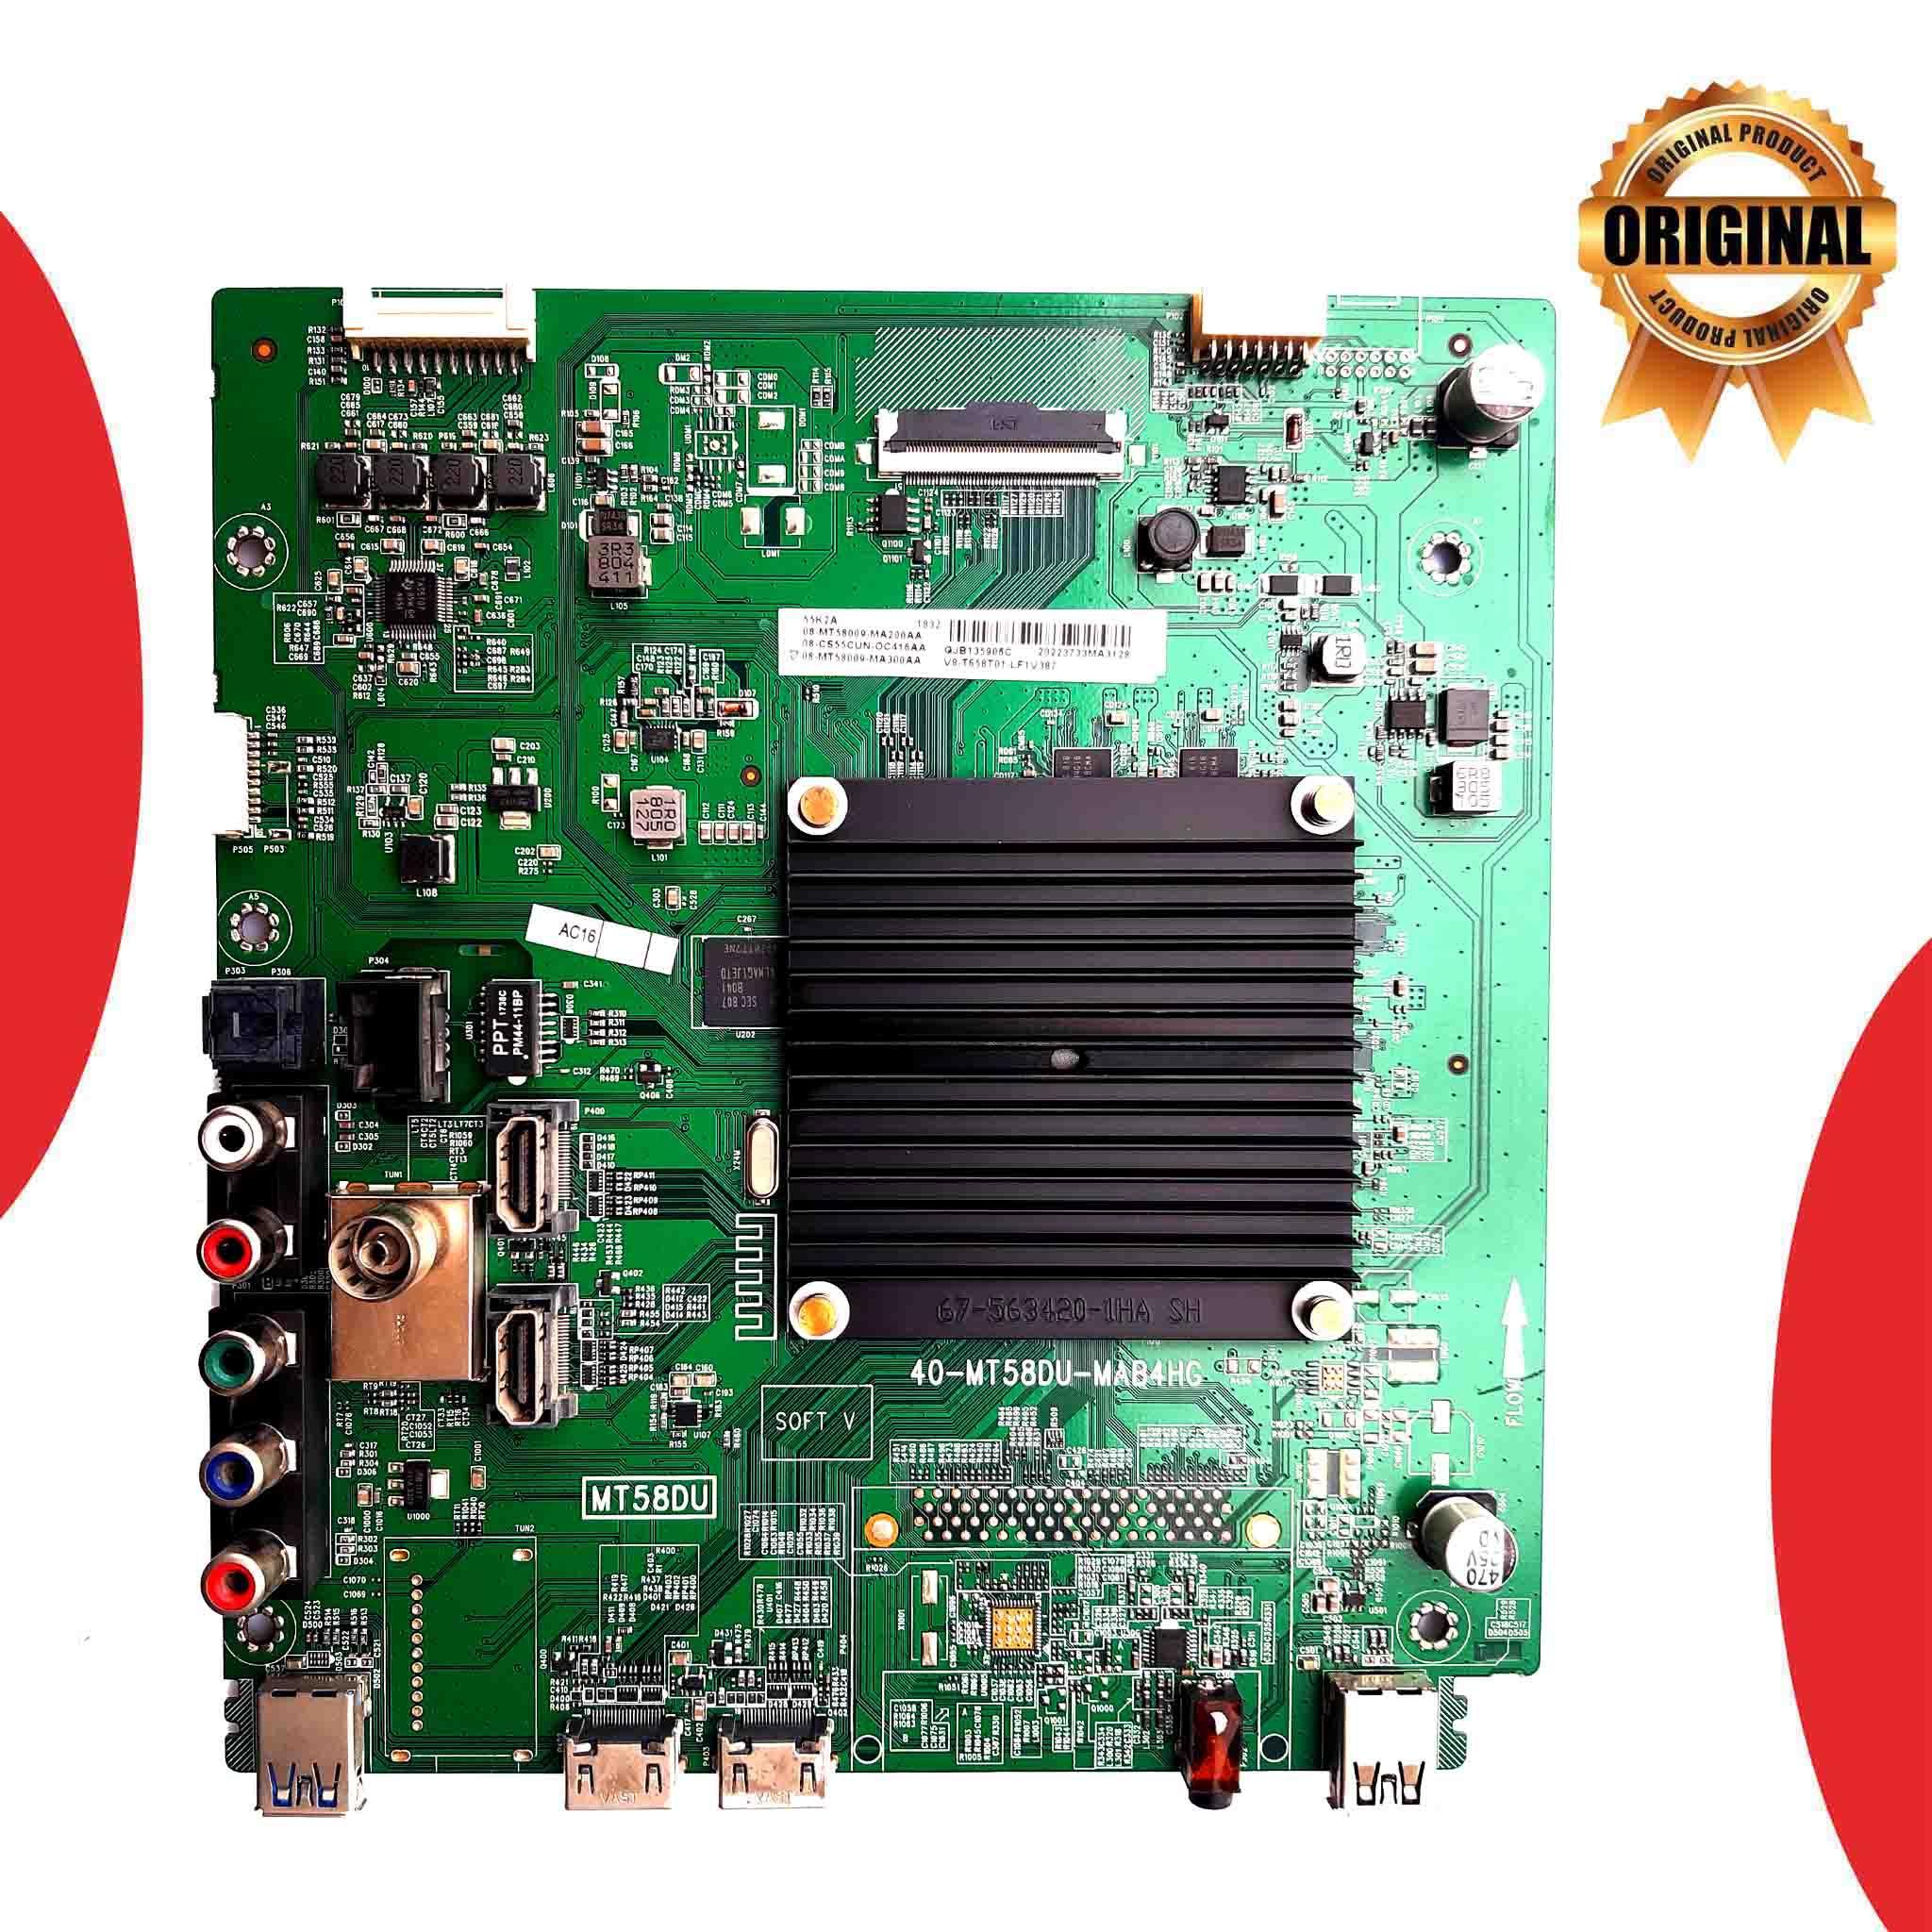 Model 55K2A iFFALCON LED TV Motherboard - Great Bharat Electronics